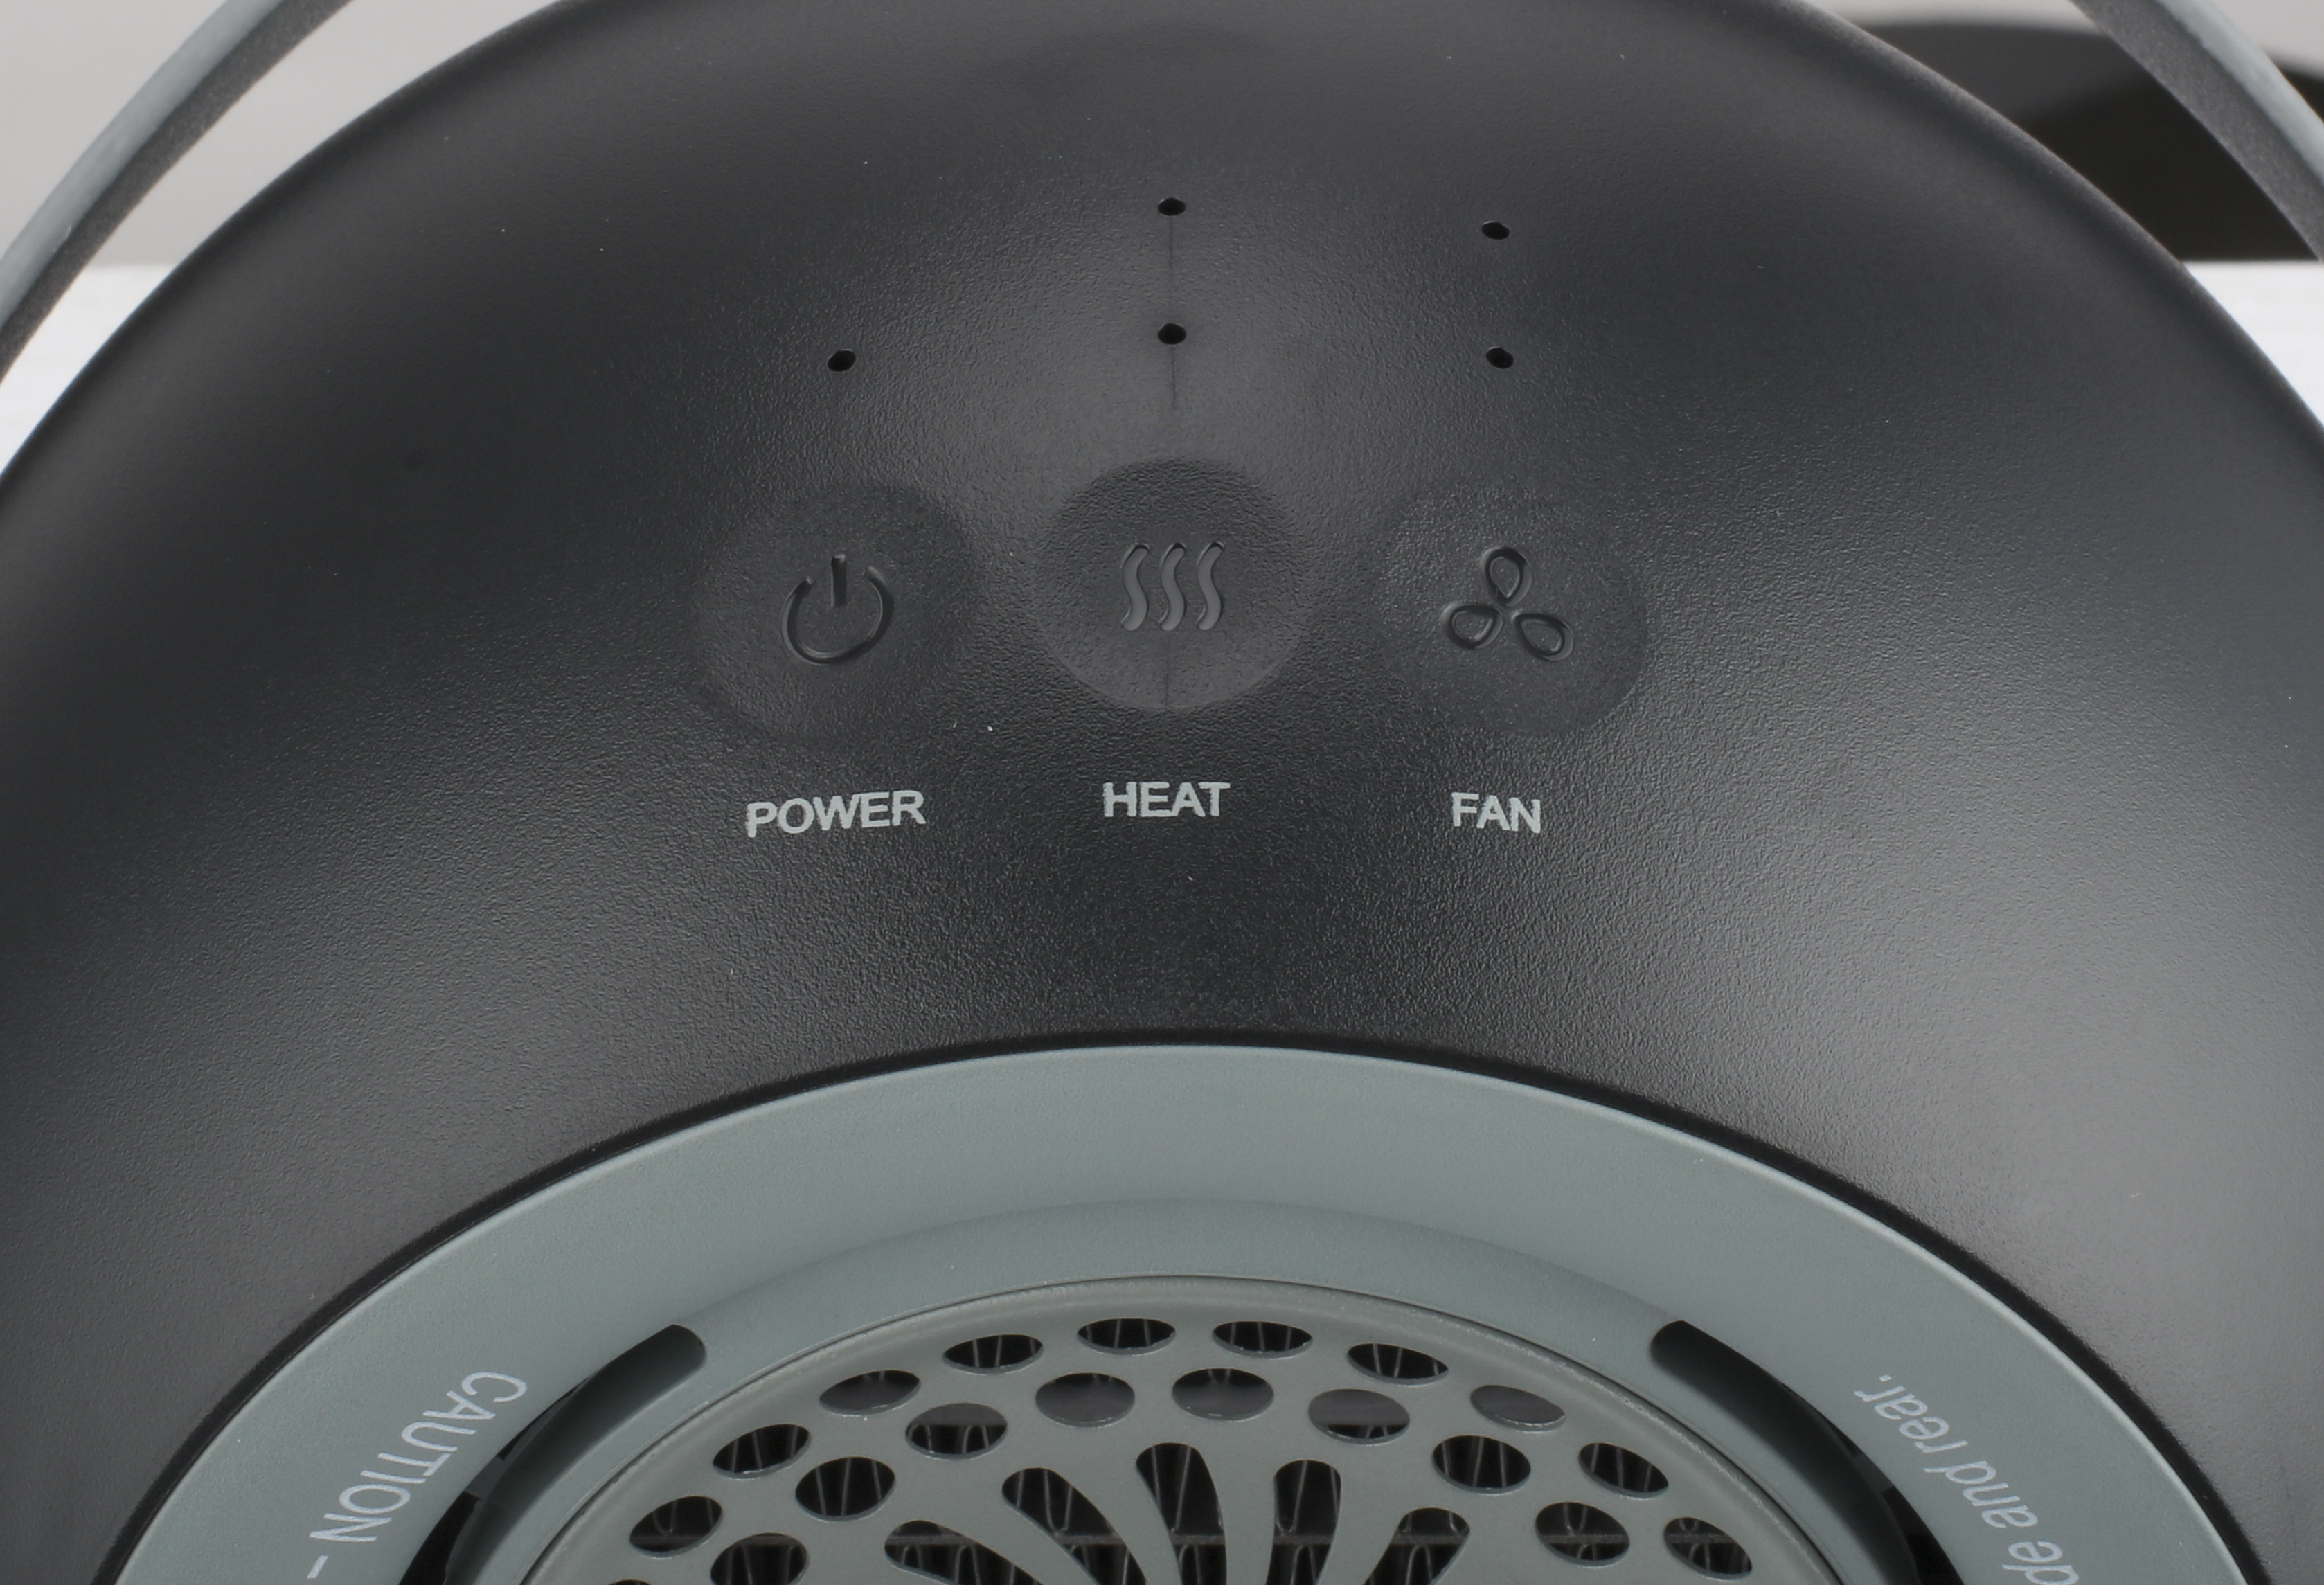 Mainstays 3-in-1 Tabletop Electrical Space Heater Fan,EP1165B, Black - image 4 of 9